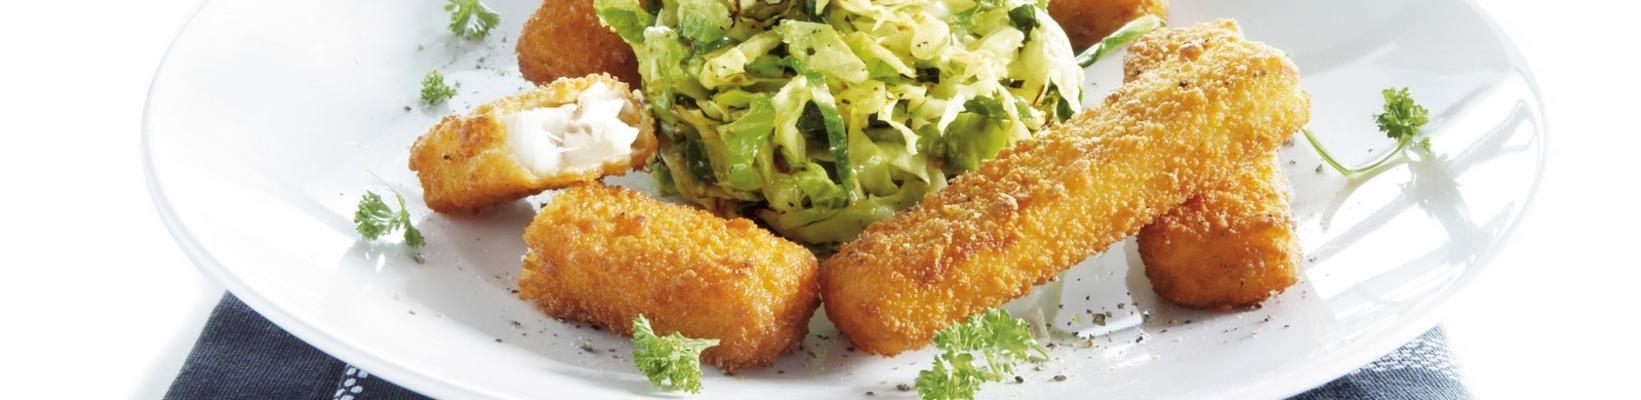 fish fingers on stir-fry of green cabbage